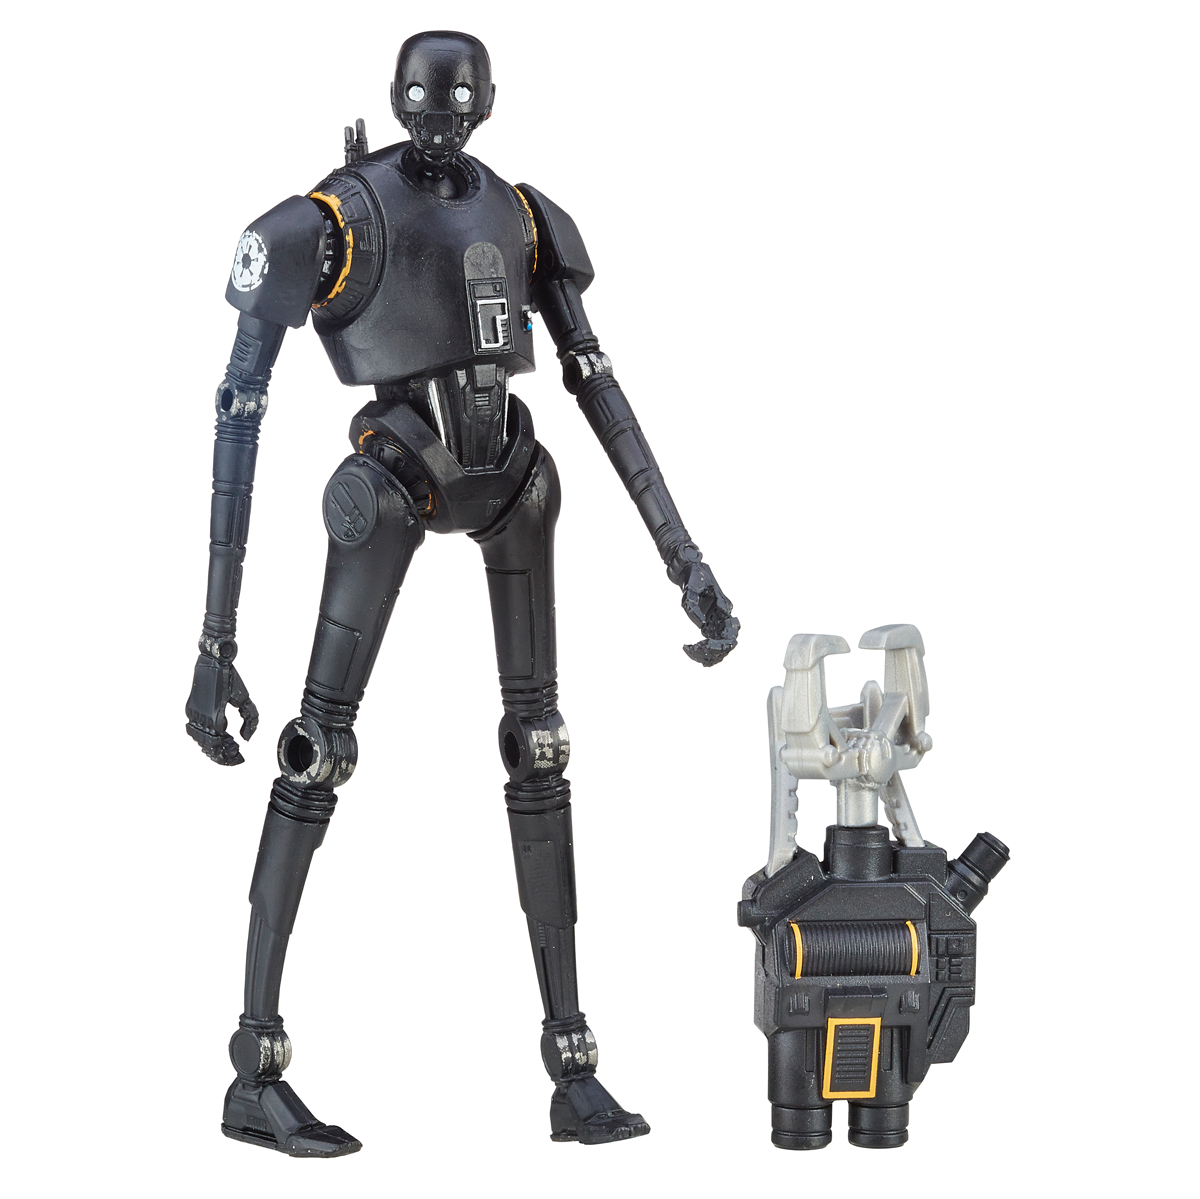 A First Look At Some Of The New Rogue One Action Figures And Playsets